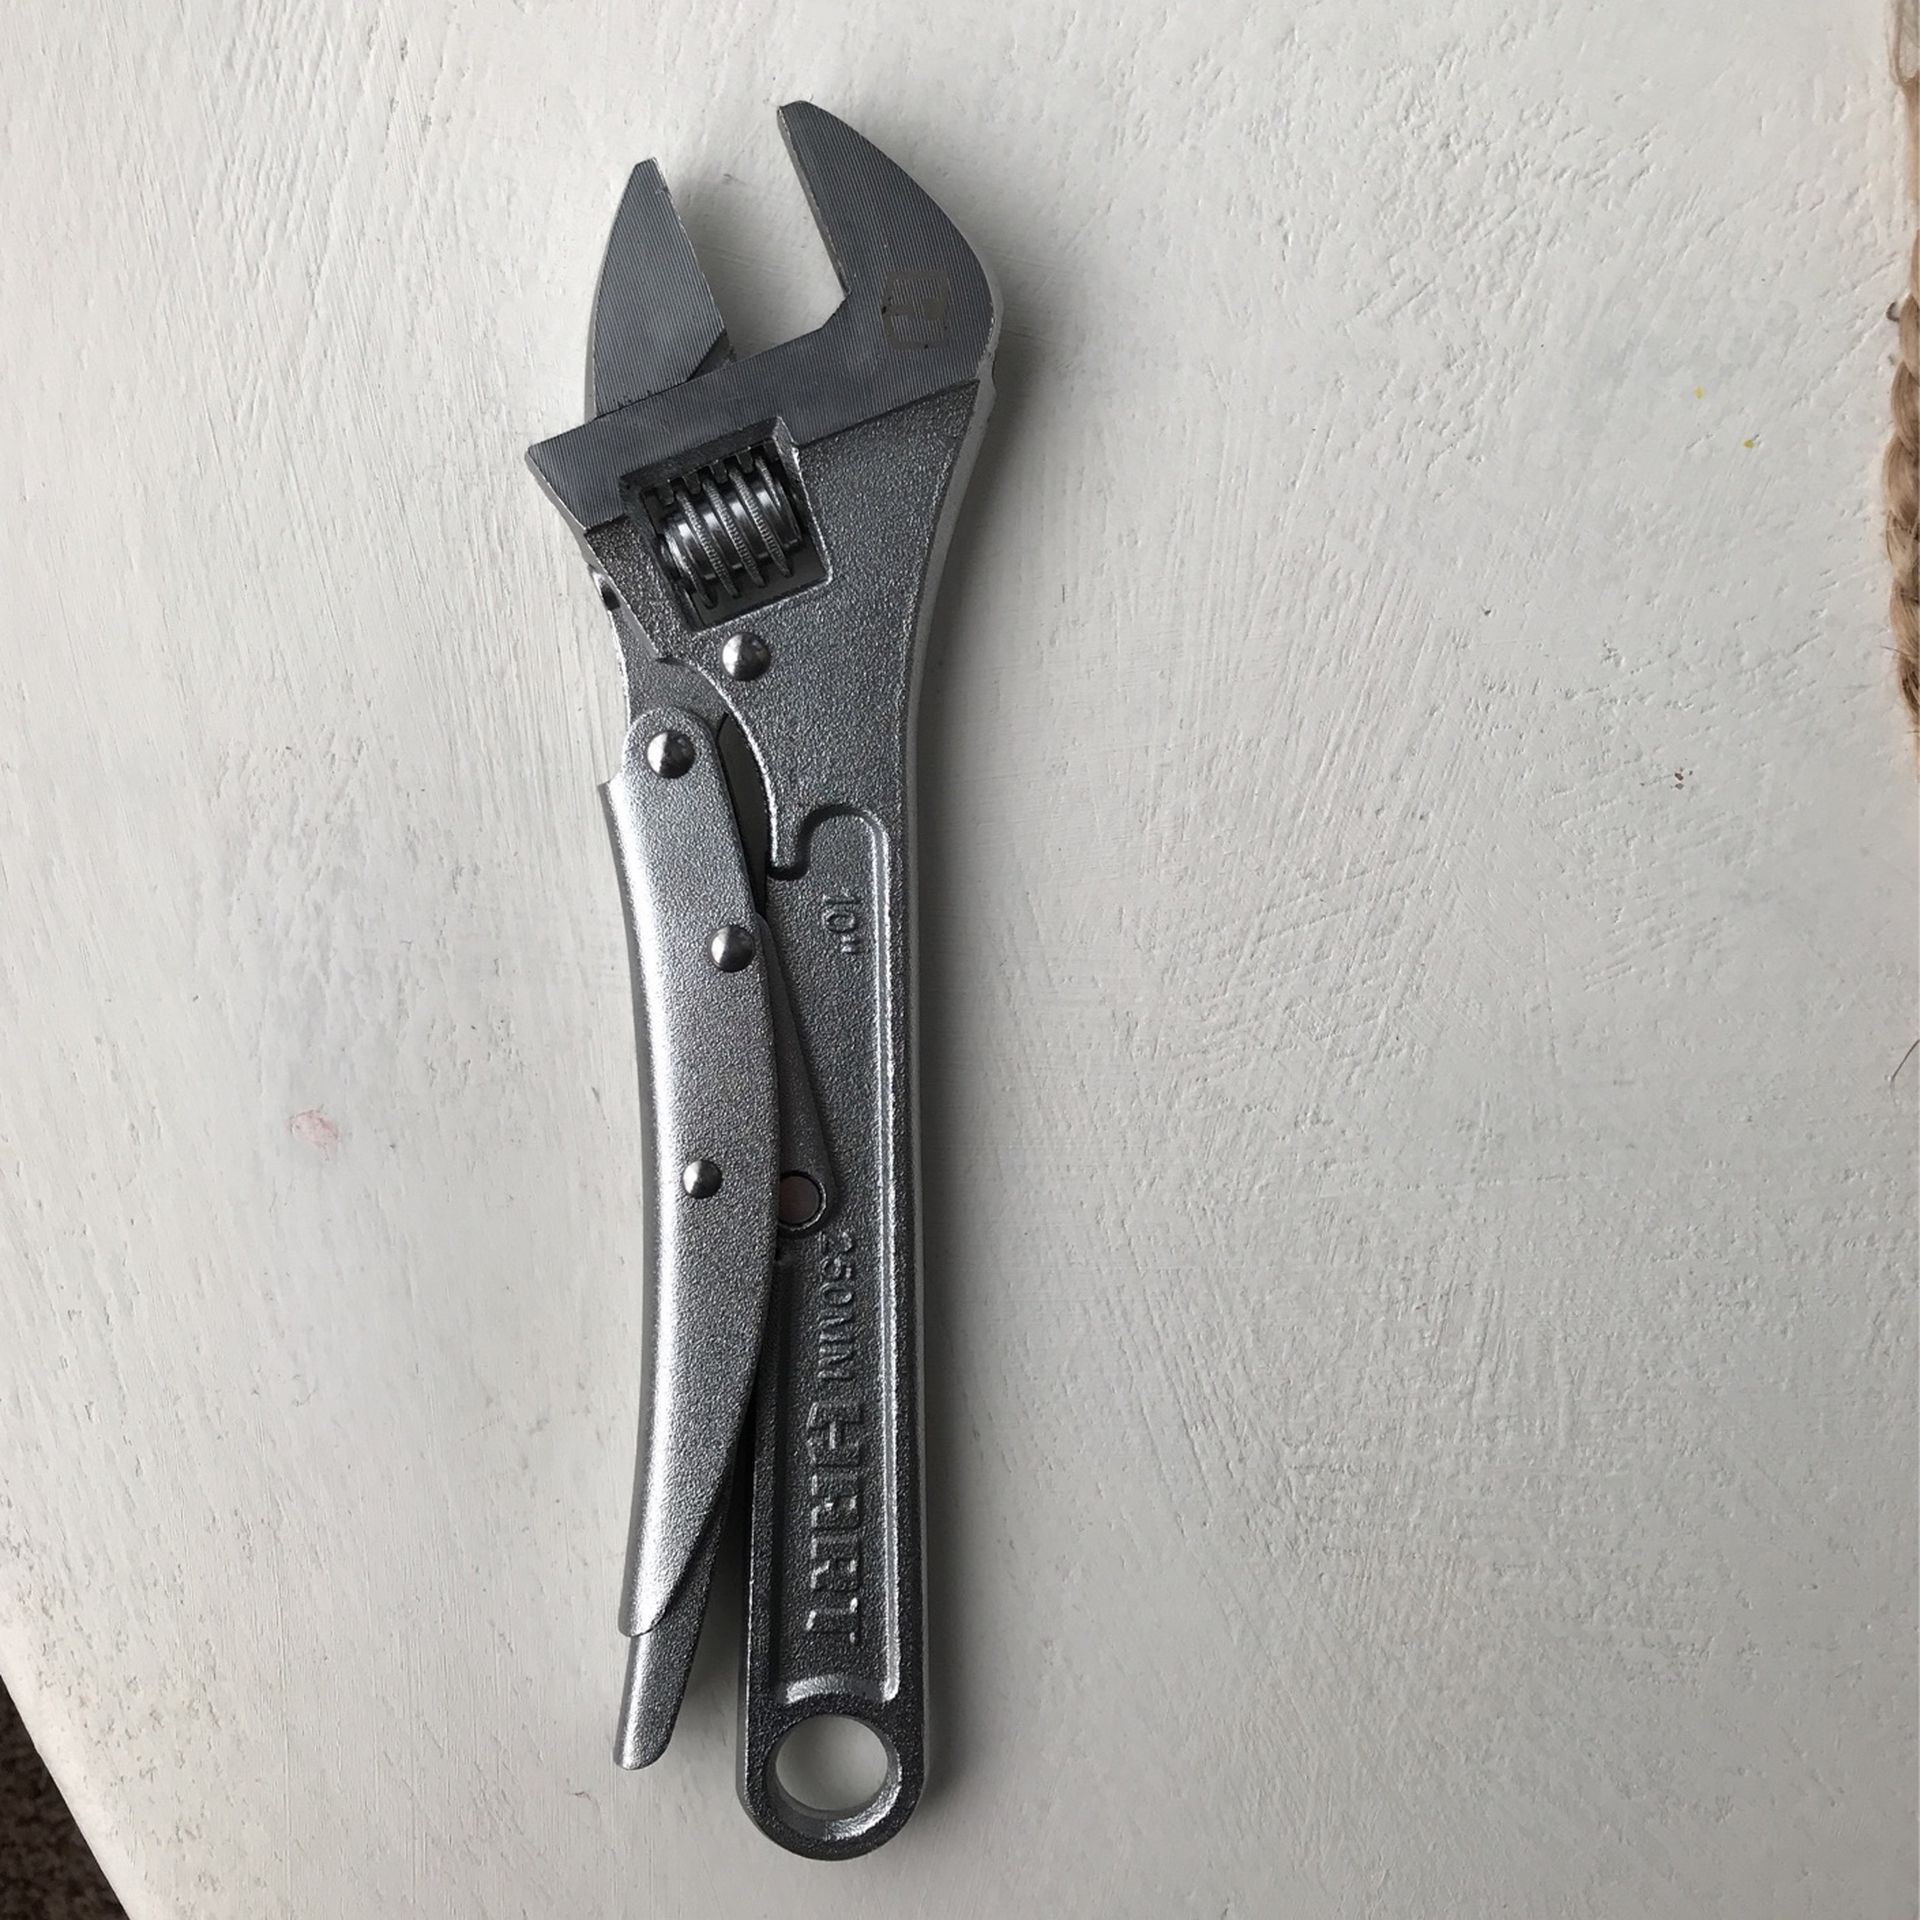 10 MM Wrench